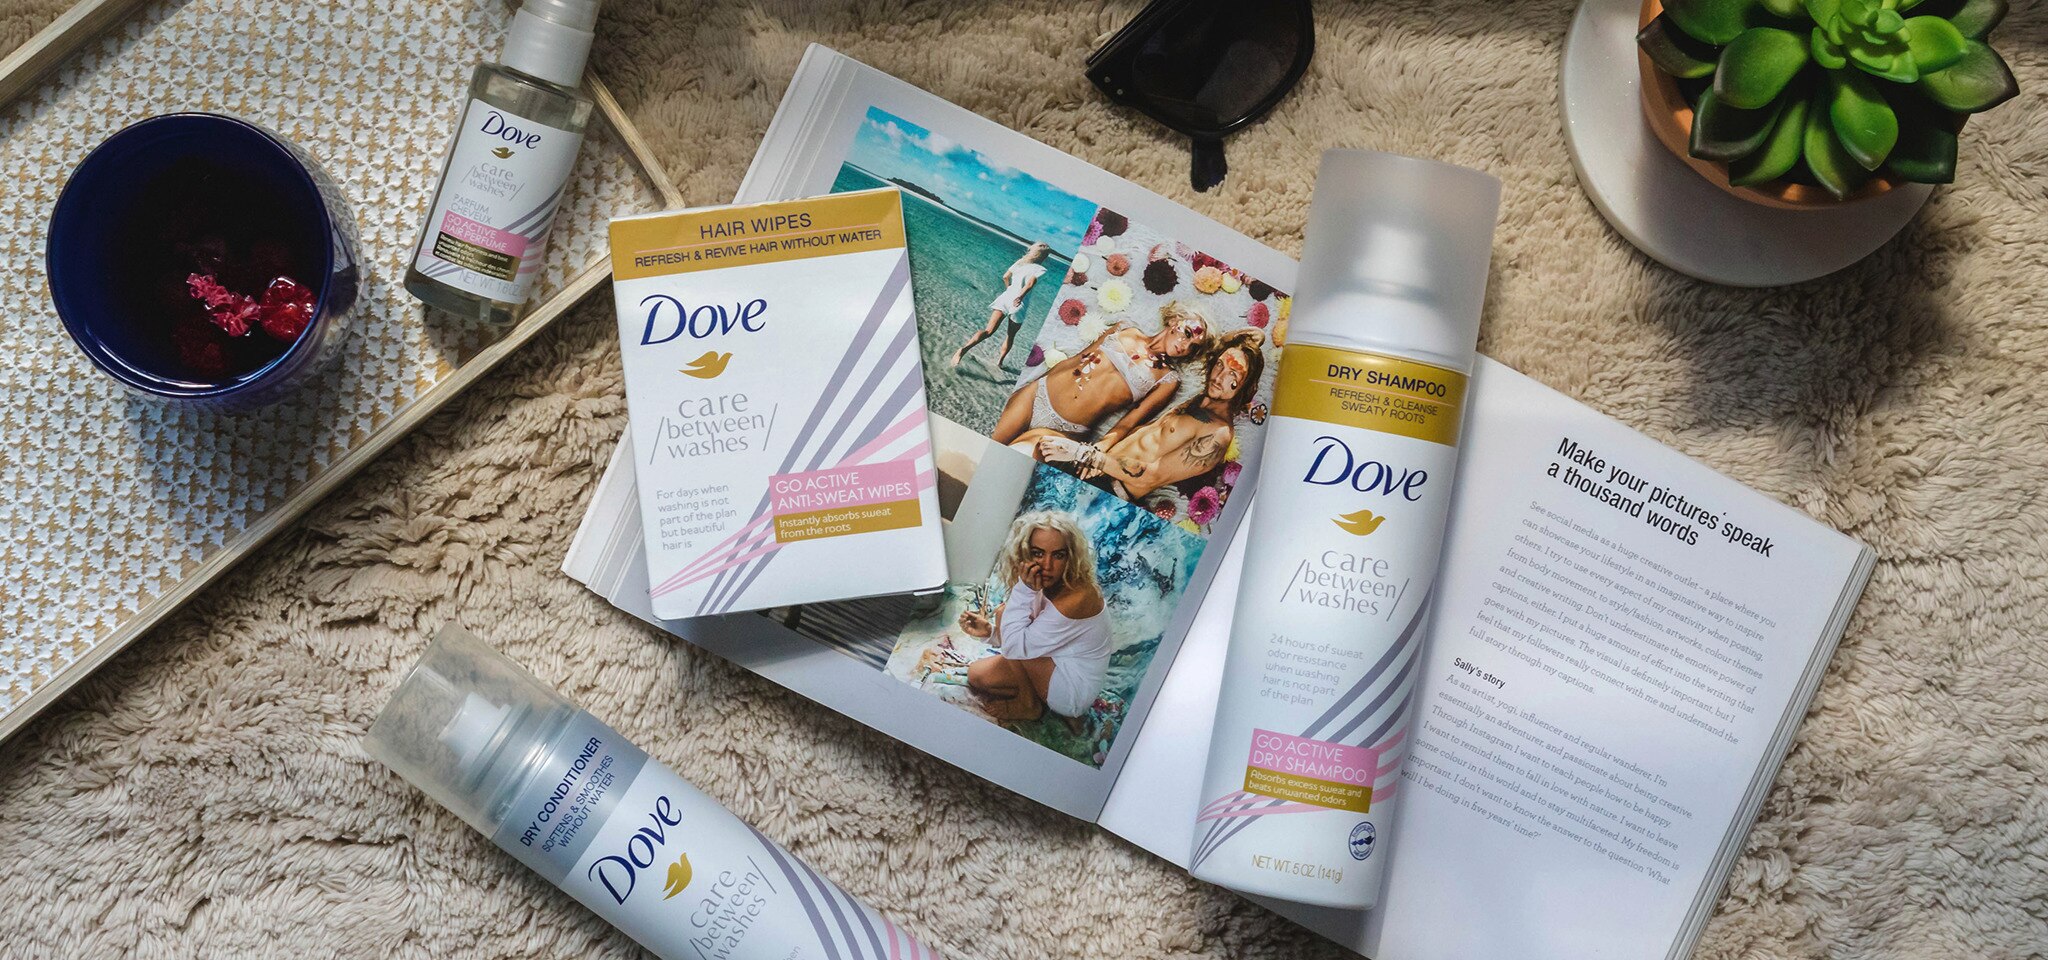 Dove Care between Washes Go Active Hair Care